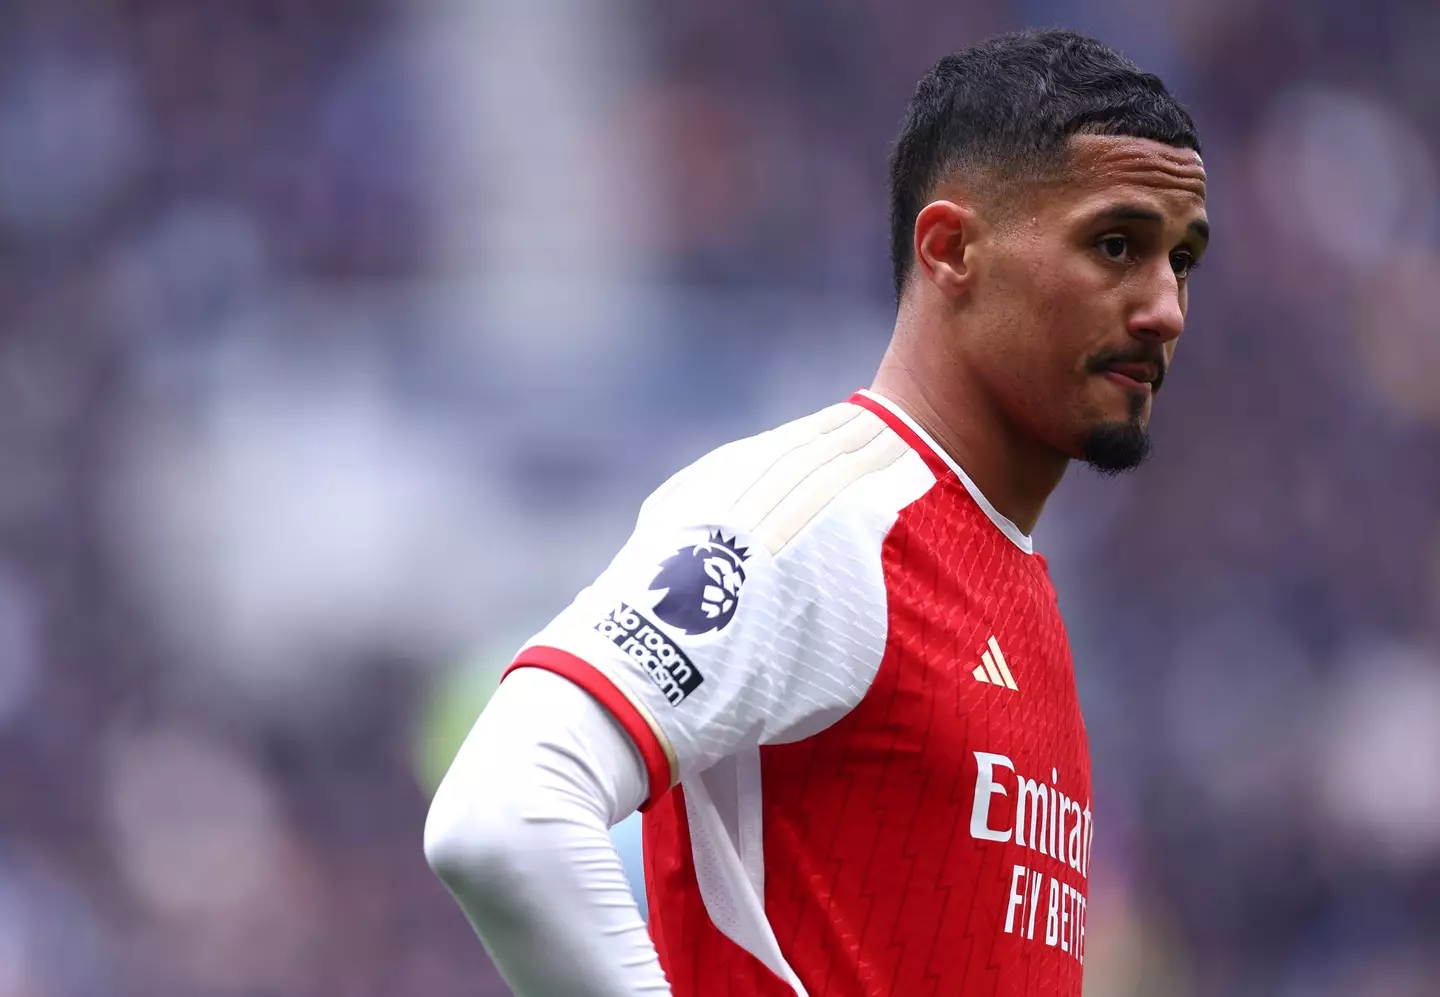 Saliba has been a revelation since breaking into Arsenal's first team (Getty)